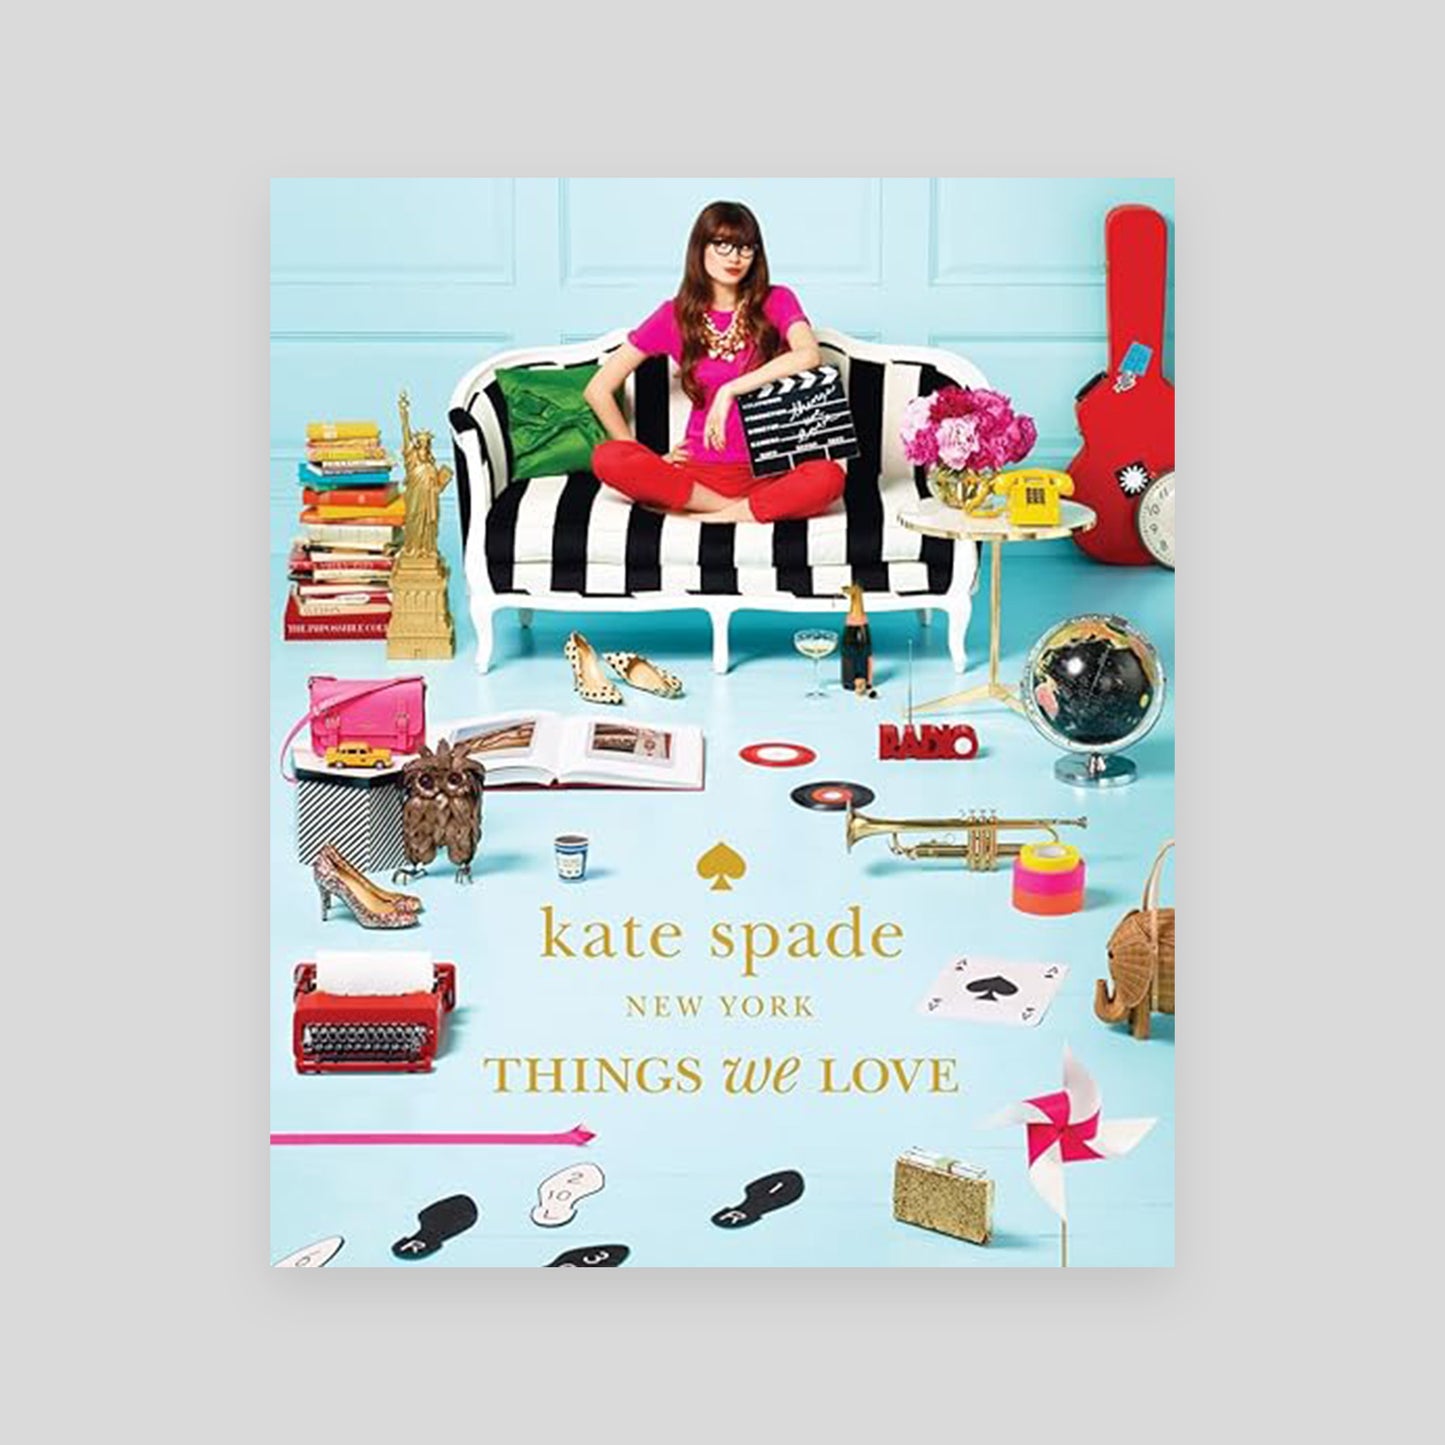 Kate Spade New York - Things We Love - Twenty Years of Inspiration, Intriguing Bits and Other Curiosities